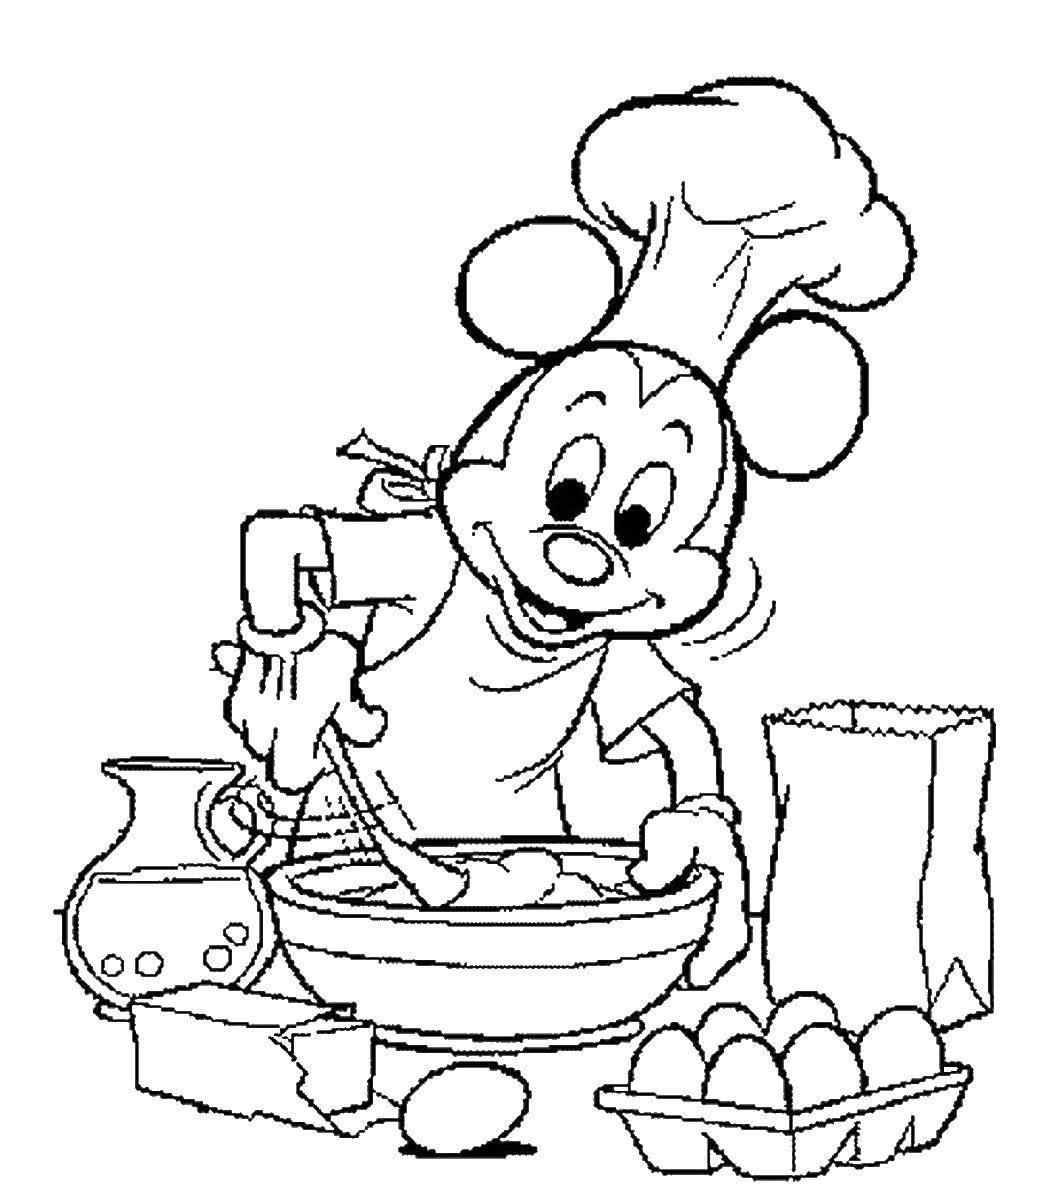 Coloring Mickey mouse prepares food. Category Cooking. Tags:  food, chef, Mickey mouse.